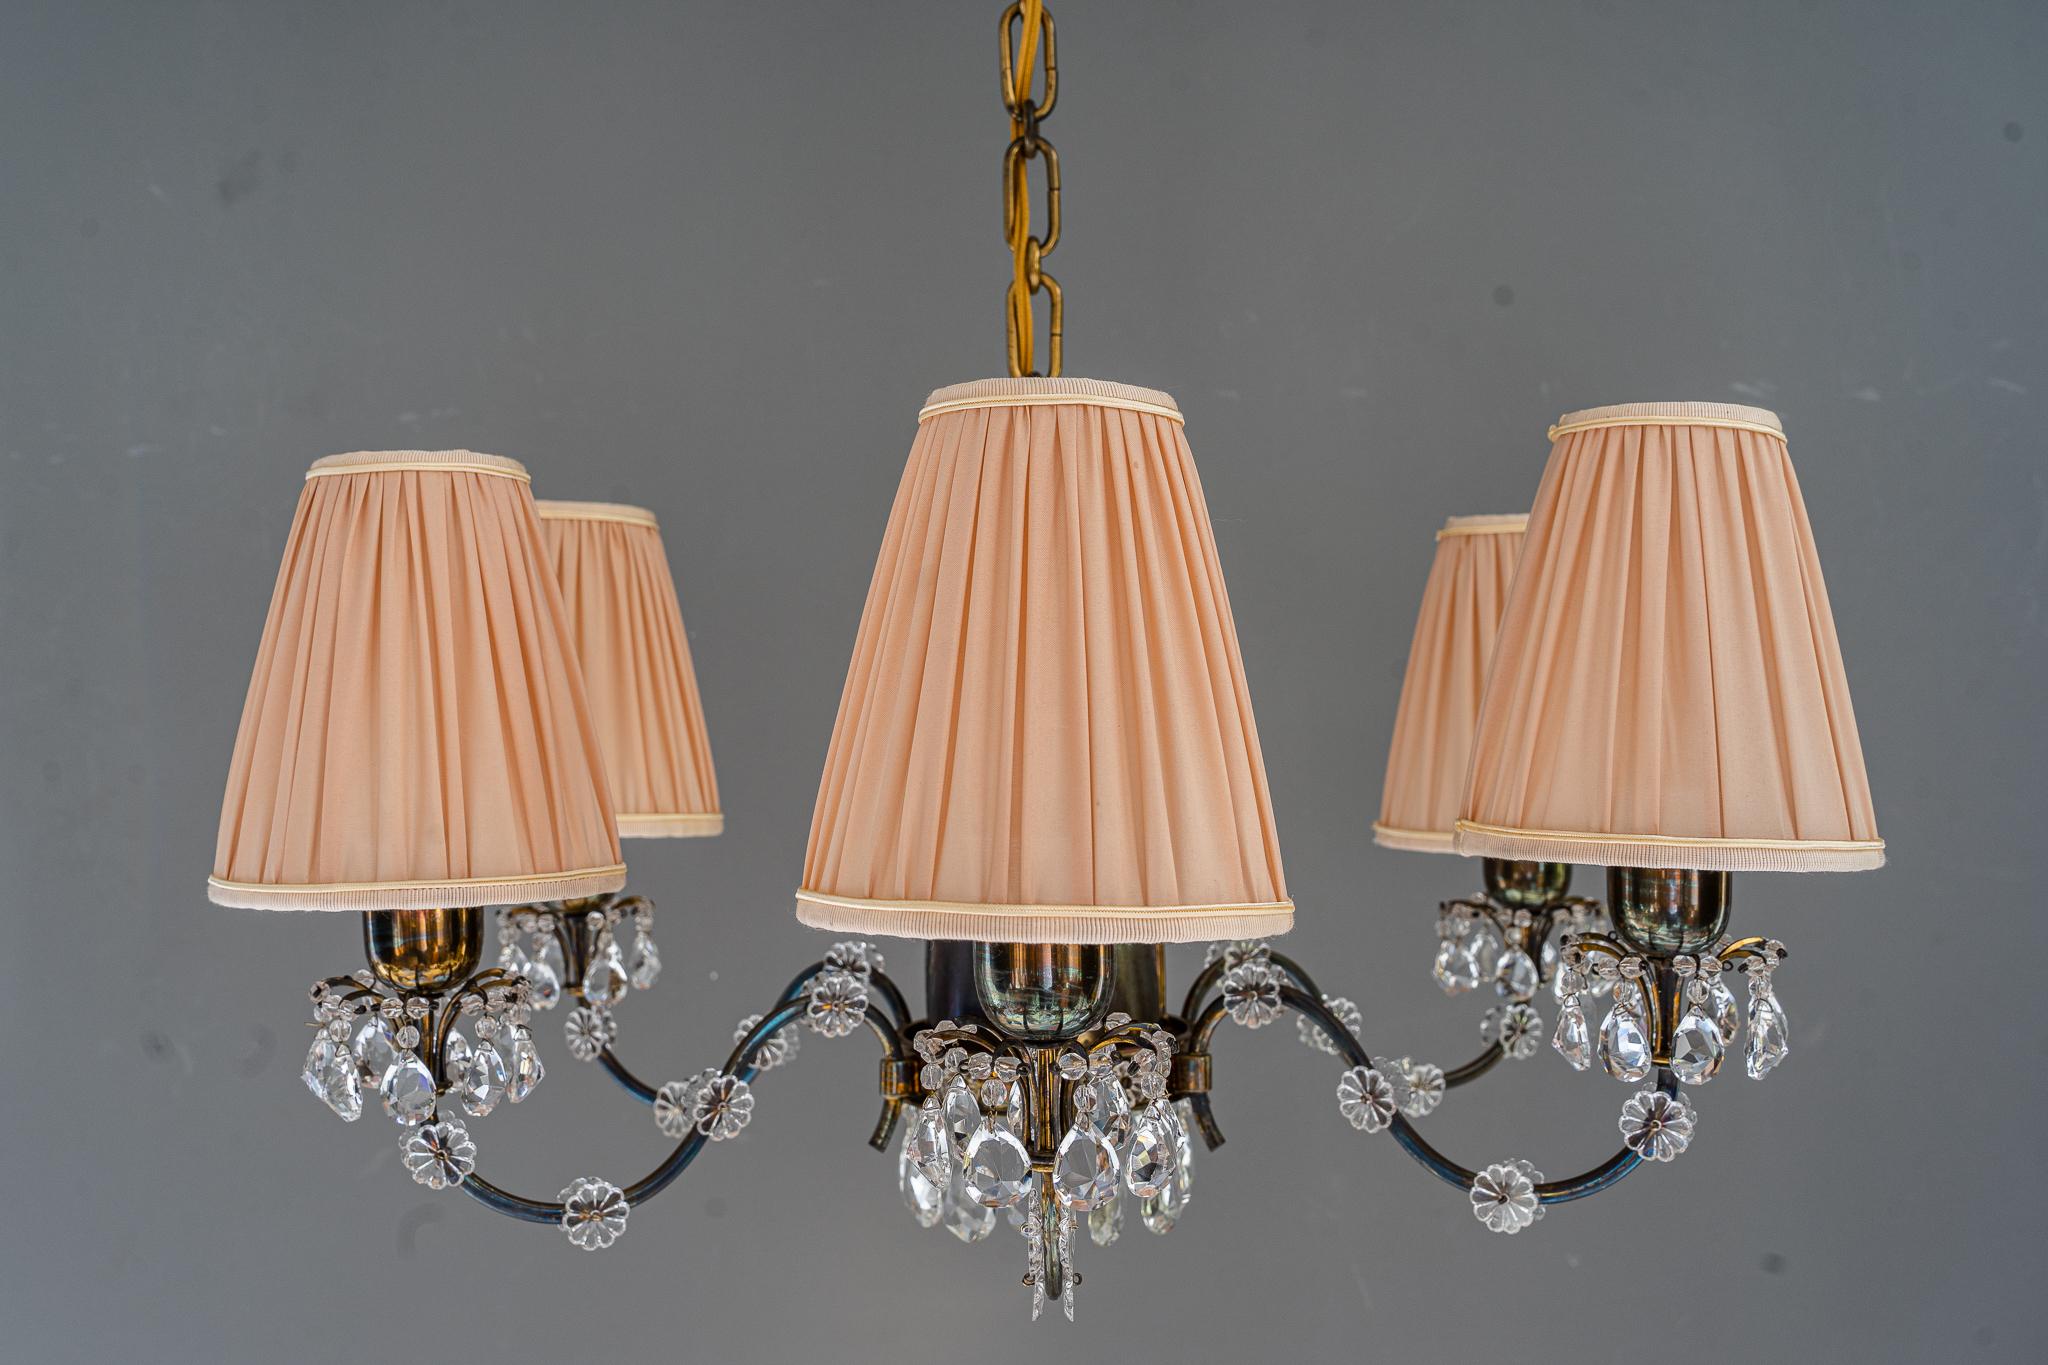 Chandelier vienna around 1950s ( Lobmeyr style )
Original condition
The fabric shades are replaced ( new )